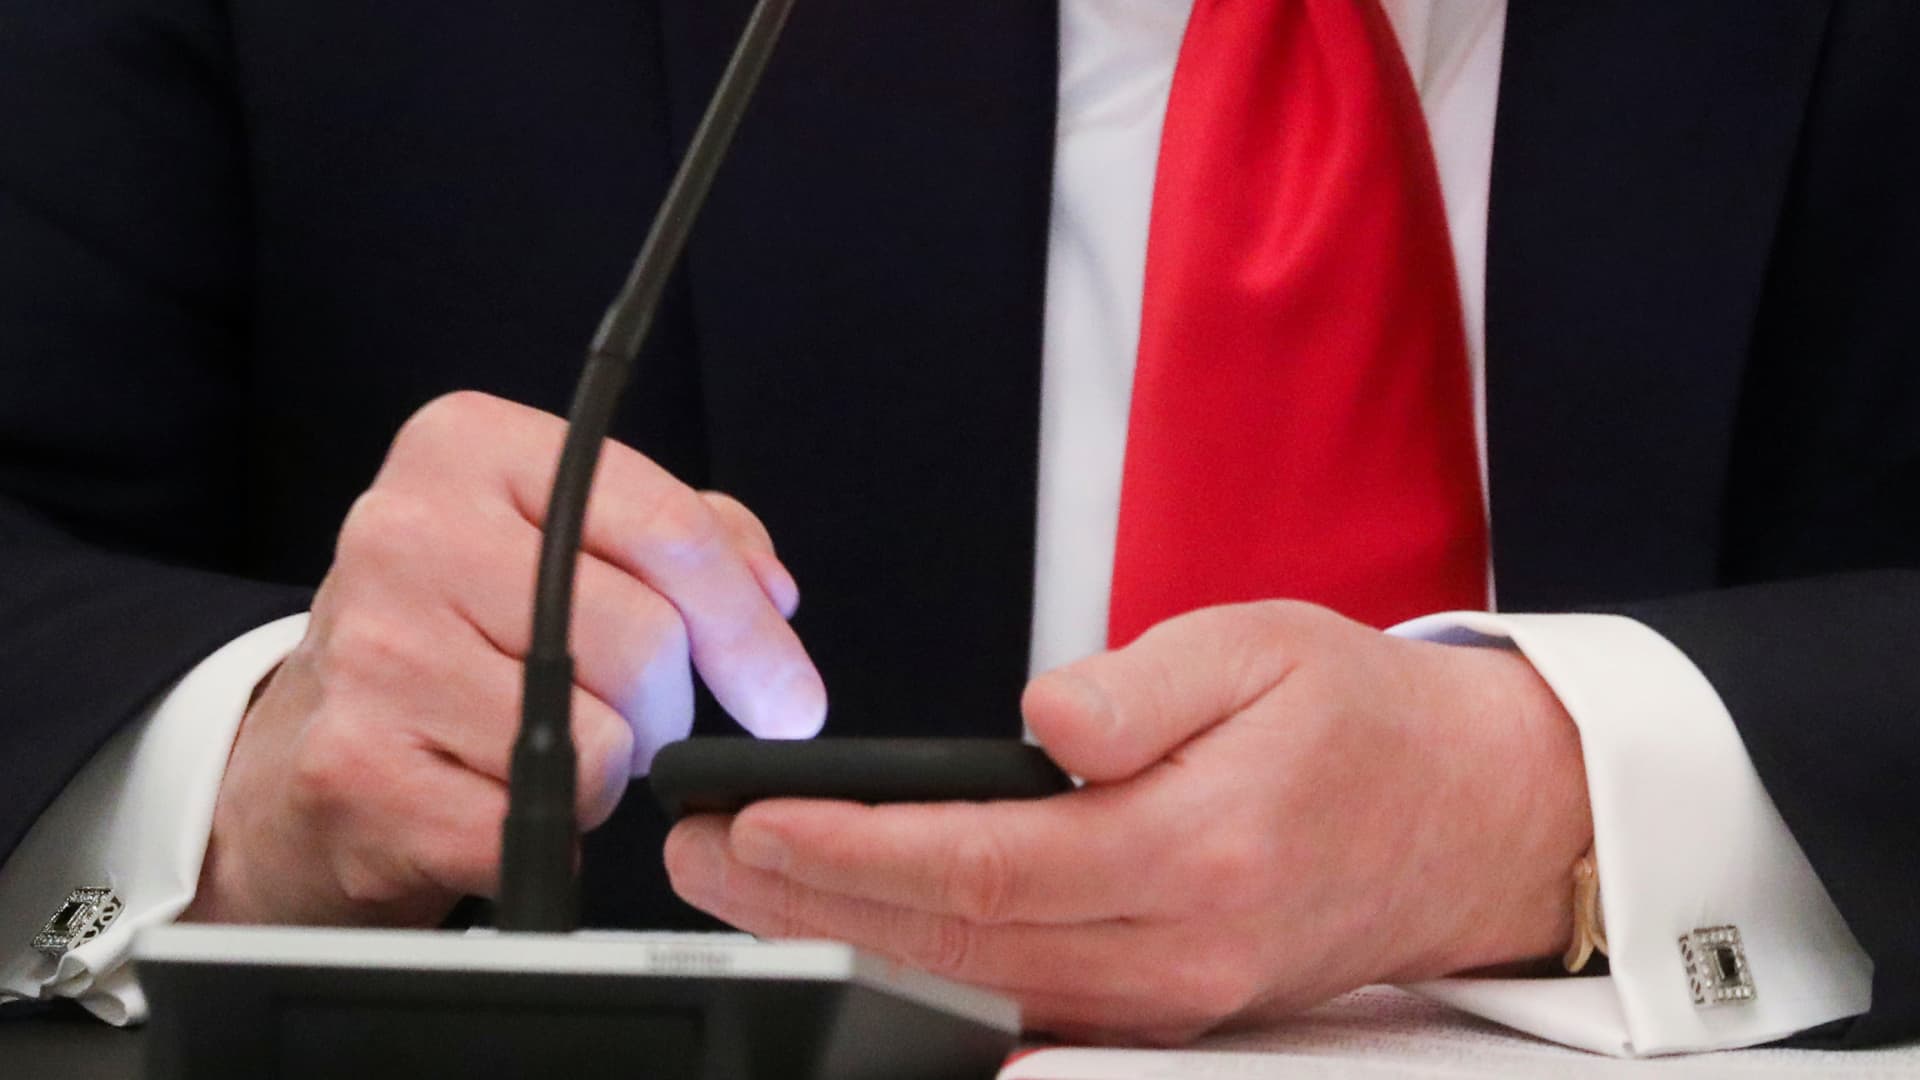 President Donald Trump is seen tapping the screen on a mobile phone at the approximate time a tweet was released from his Twitter account, during a roundtable discussion on the reopening of small businesses in the State Dining Room at the White House in Washington, U.S., June 18, 2020.